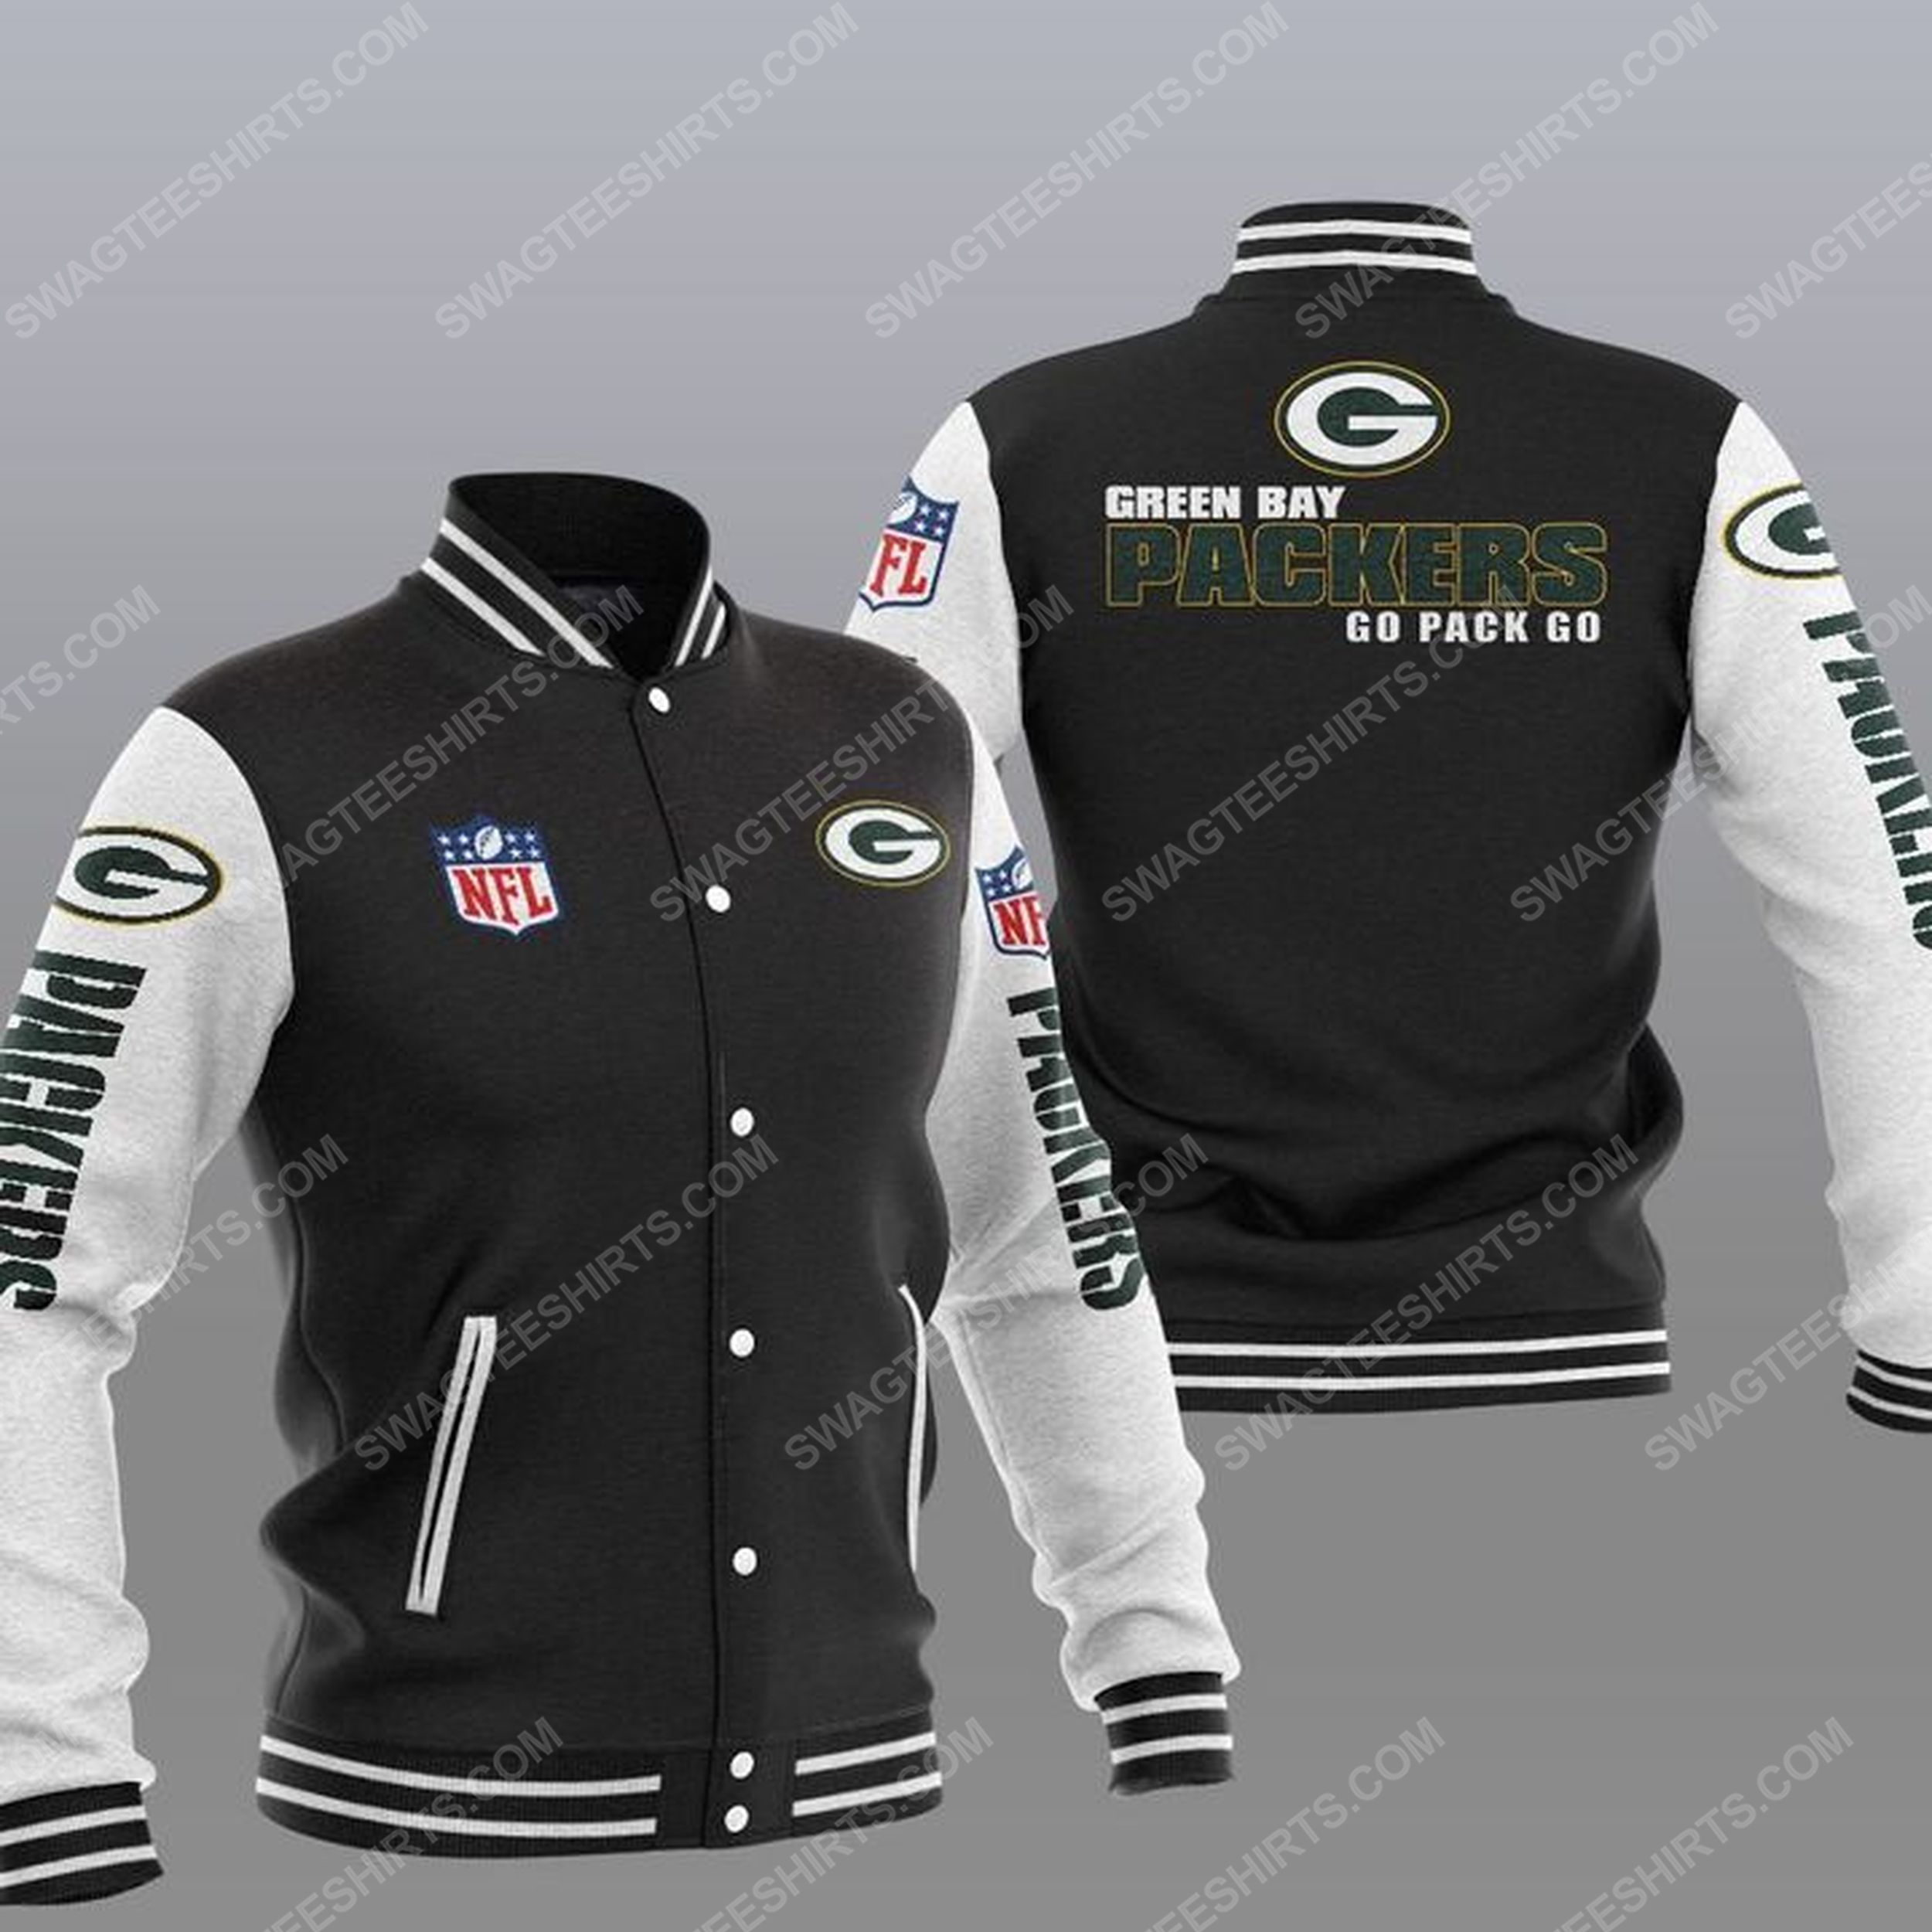 The green bay packers nfl all over print baseball jacket - black 1